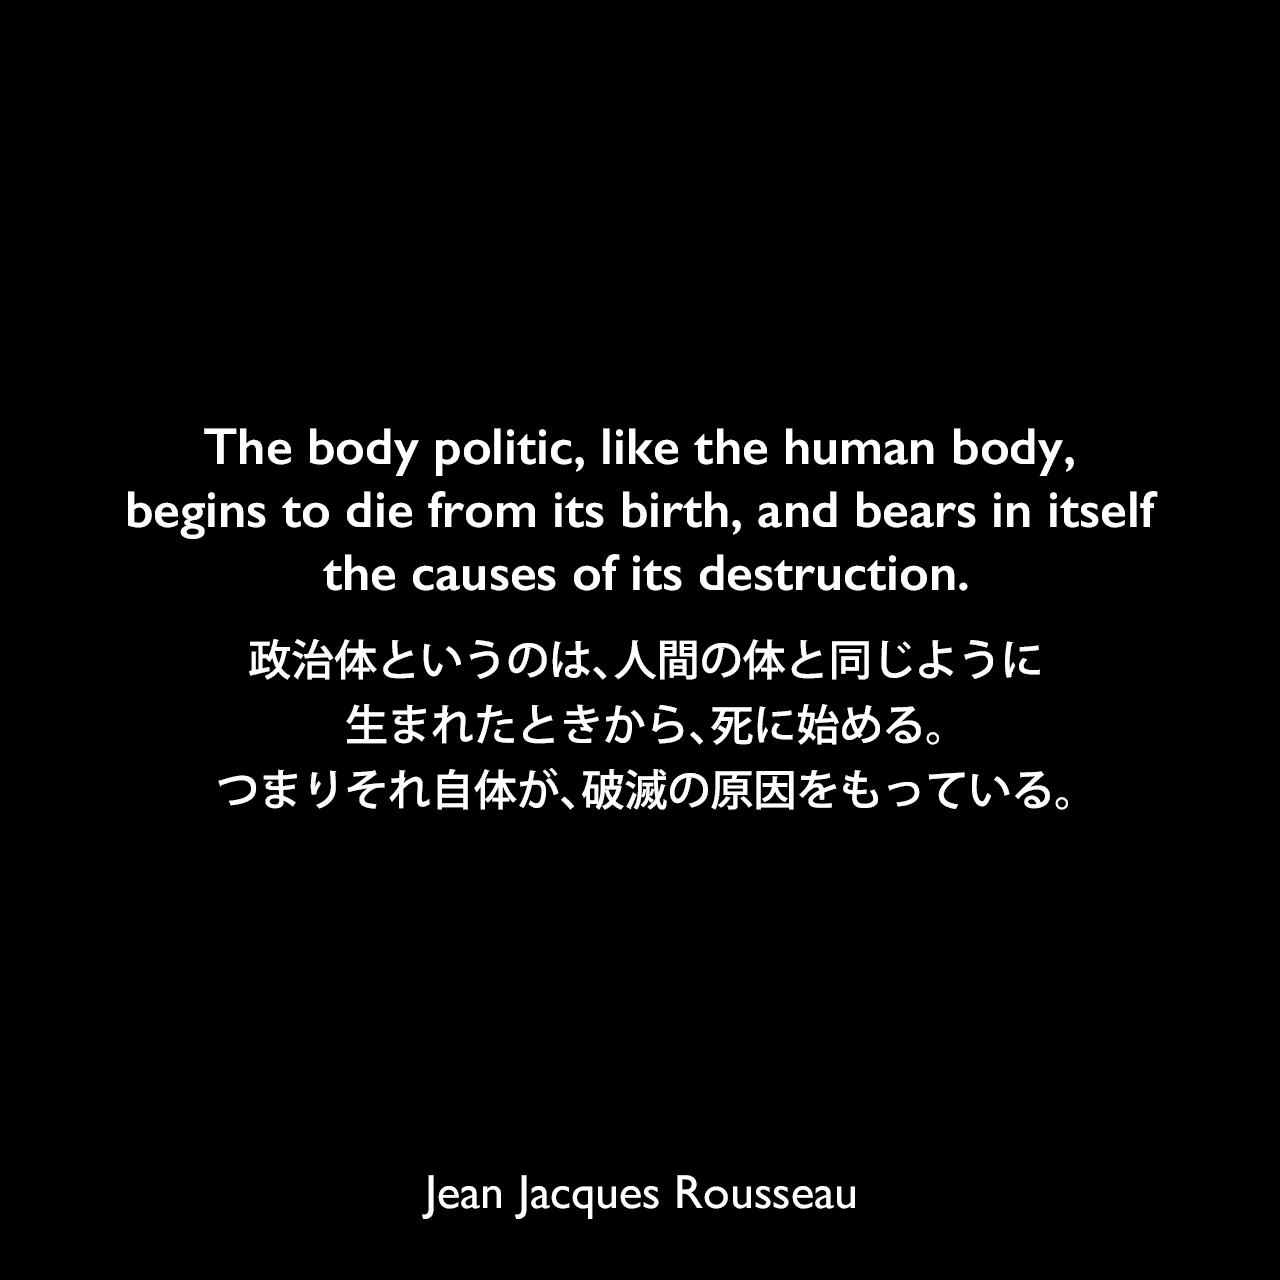 The body politic, like the human body, begins to die from its birth, and bears in itself the causes of its destruction.政治体というのは、人間の体と同じように、生まれたときから、死に始める。つまりそれ自体が、破滅の原因をもっている。Jean Jacques Rousseau